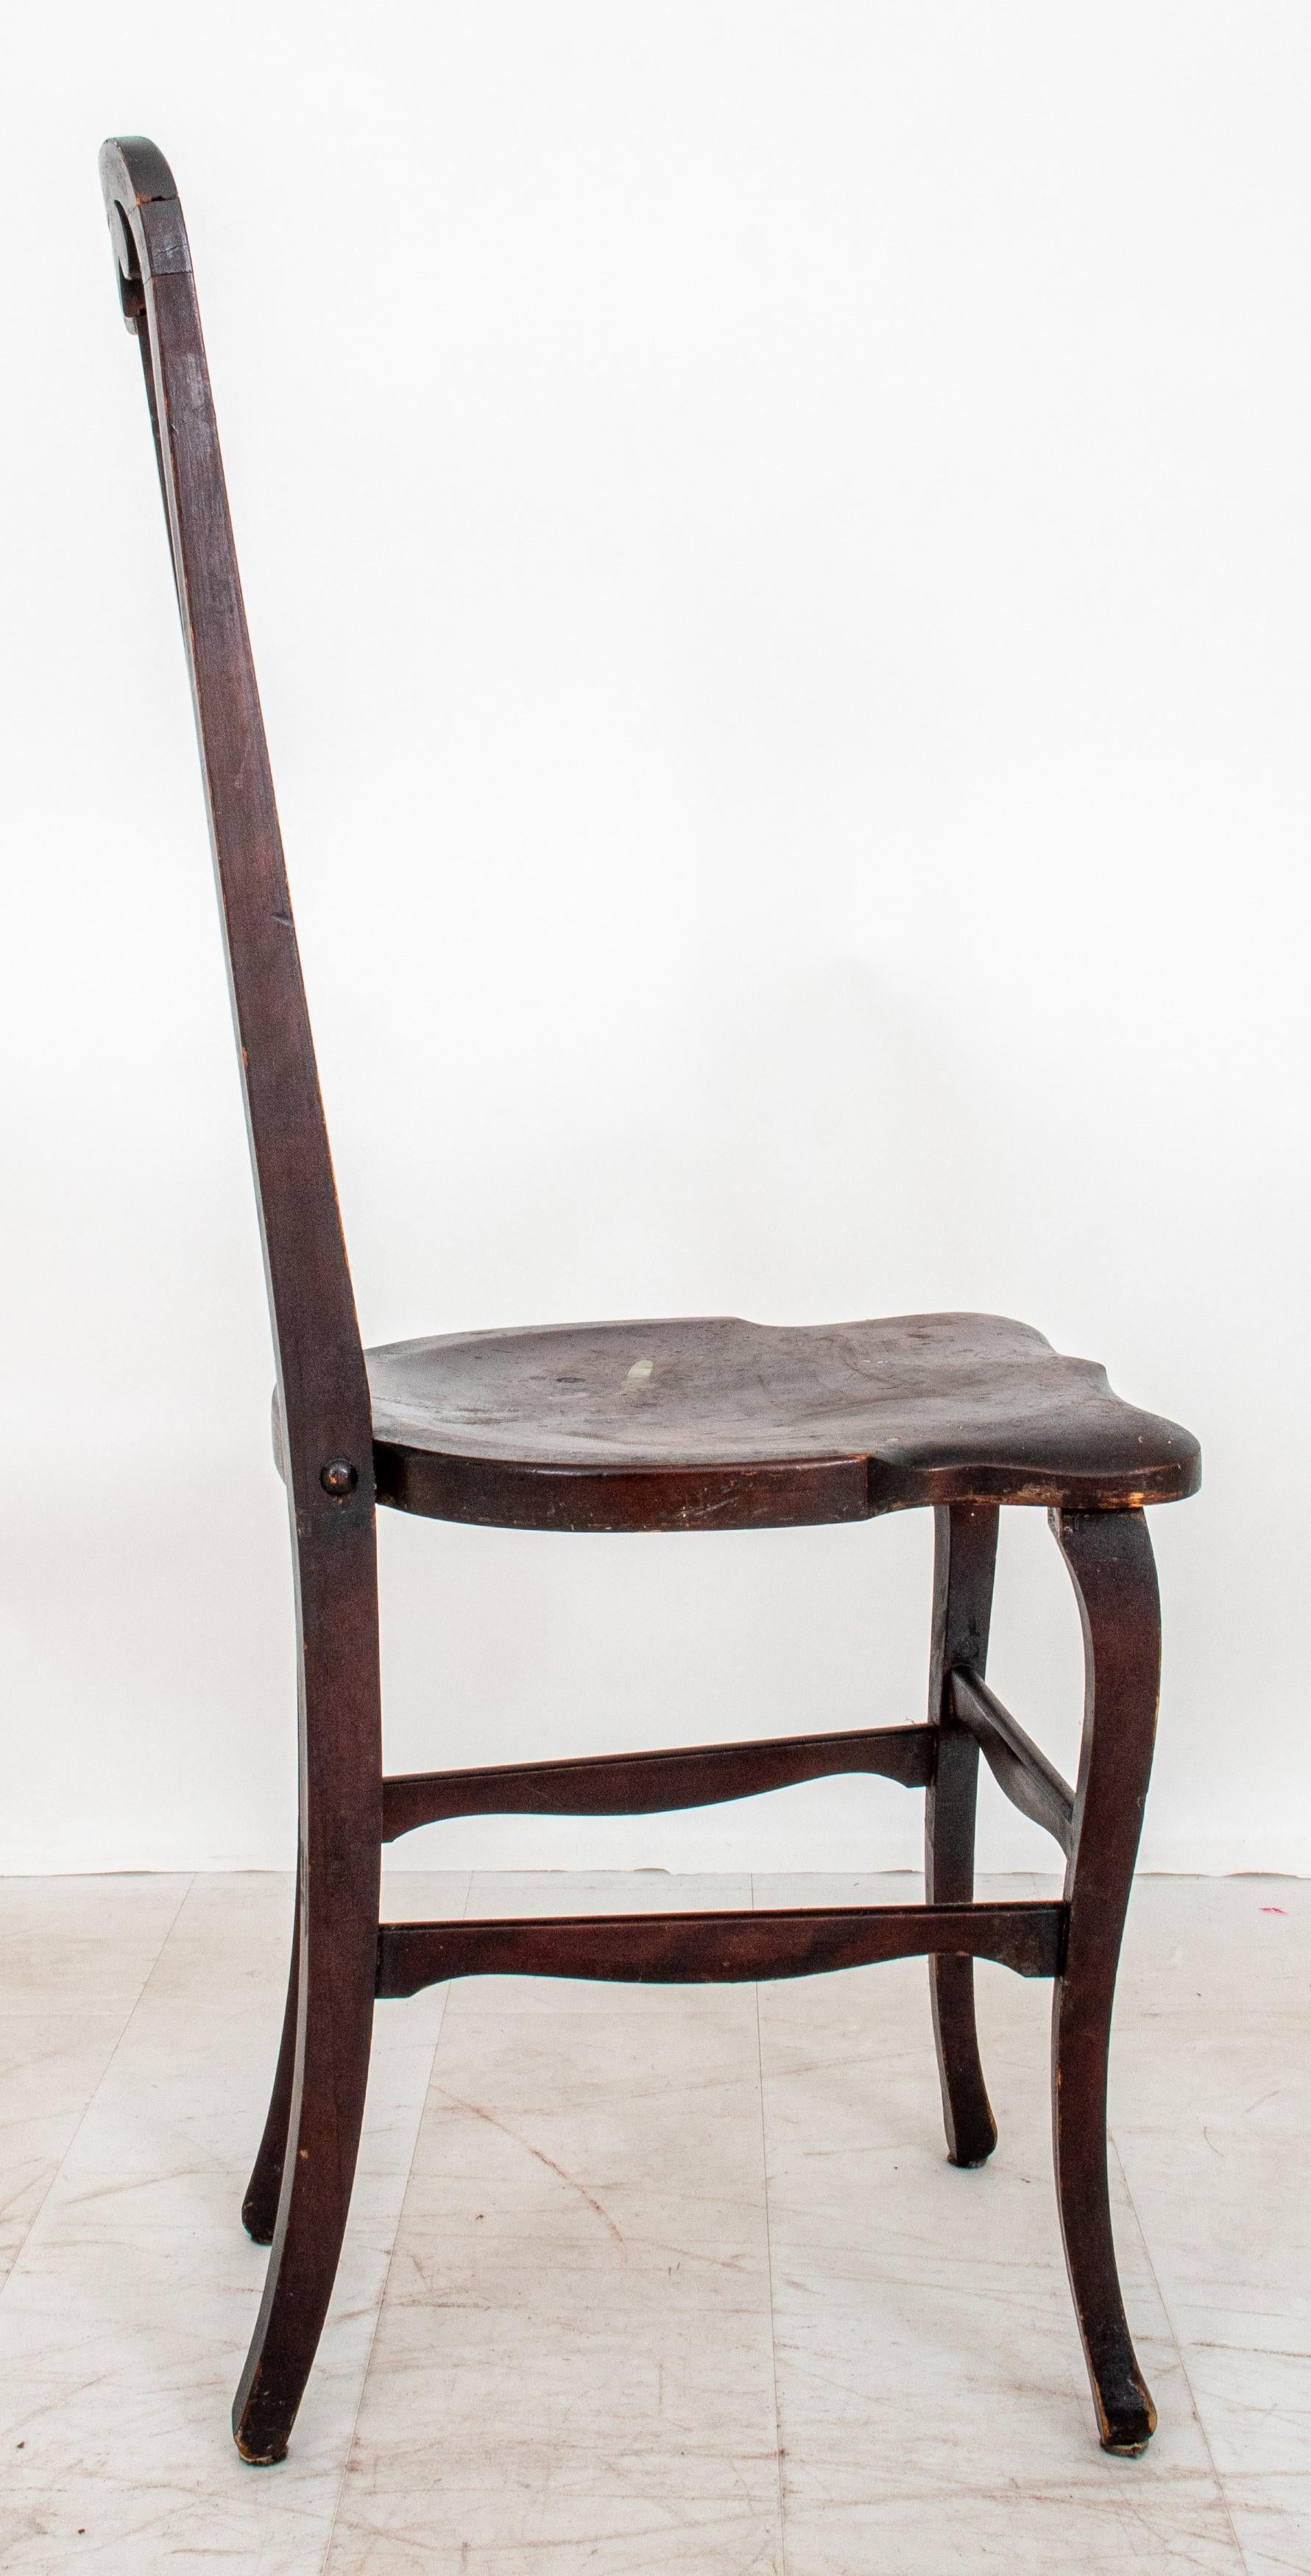  Antique American Colonial Revival wooden side or hall chair, dating back to circa 1900. Here are the specifications:

Style: American Colonial Revival
Construction Material: Wooden
Features:
Elongated vasiform backs
Shaped curvilinear seat
Four